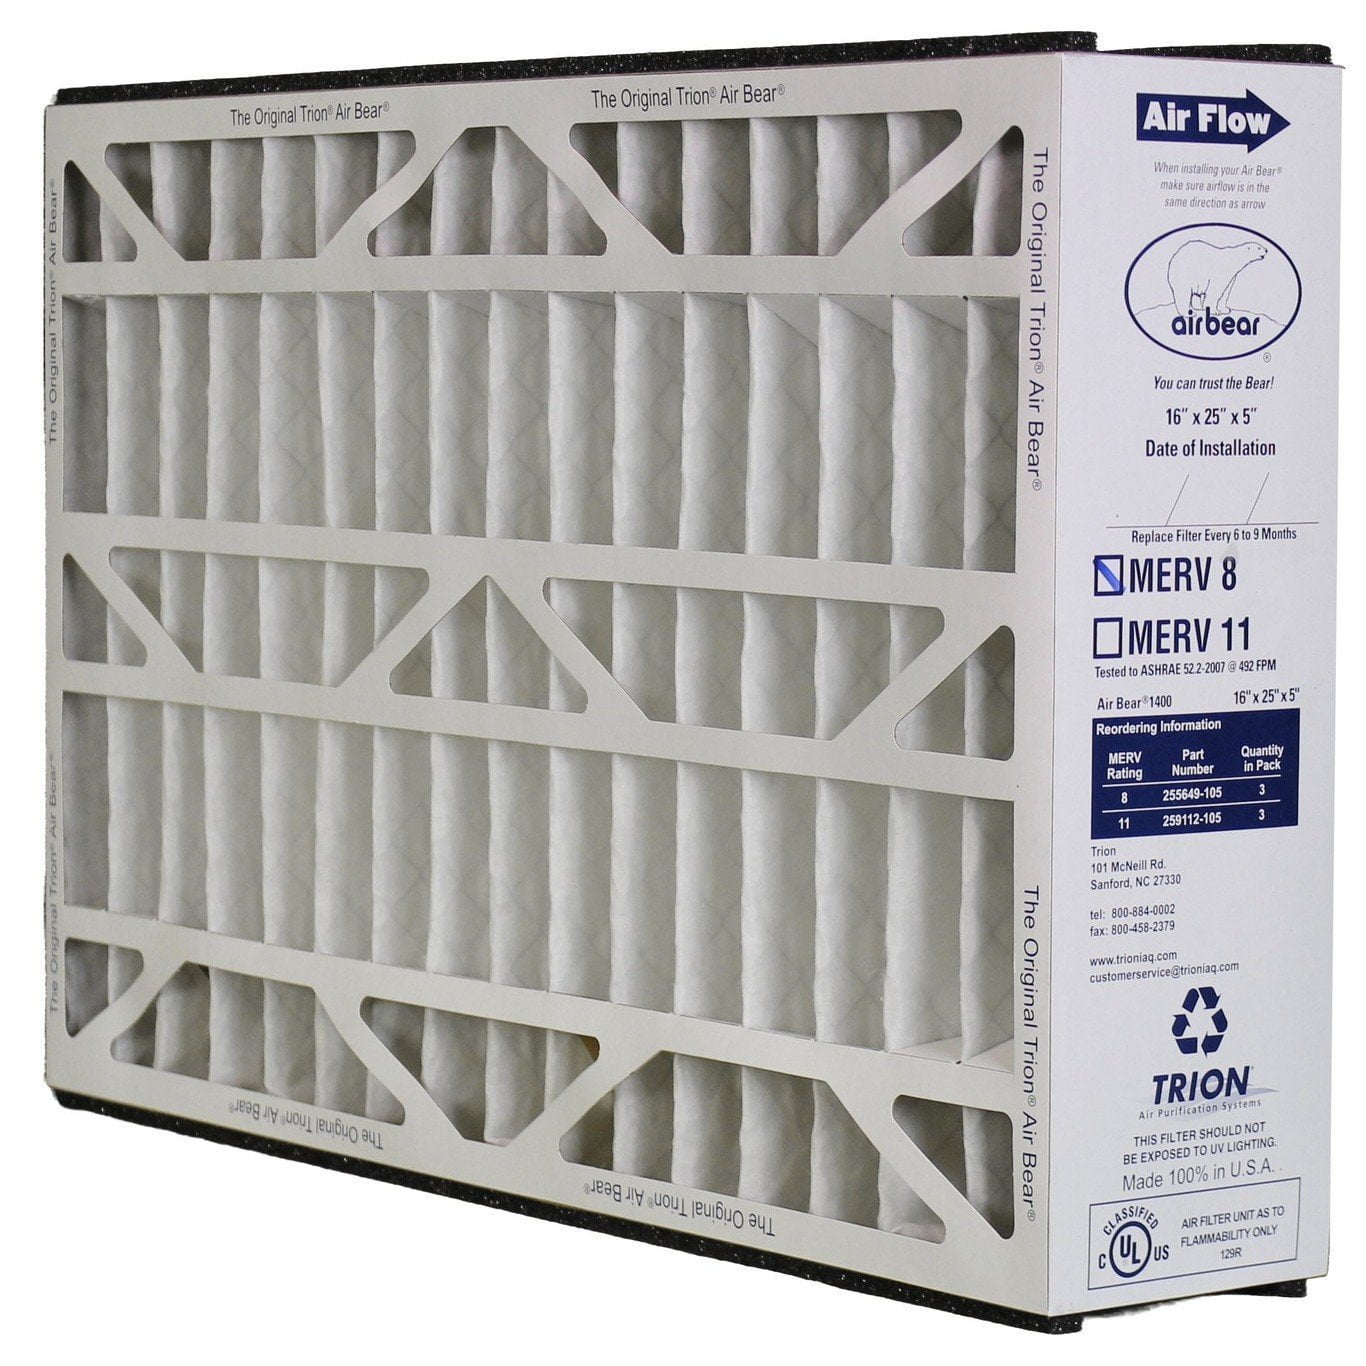 TRION AIR BEAR FURNACE PREFILTER FILTER FOR 20X25X5 16X25X5 PERMANENT WASHABLE 